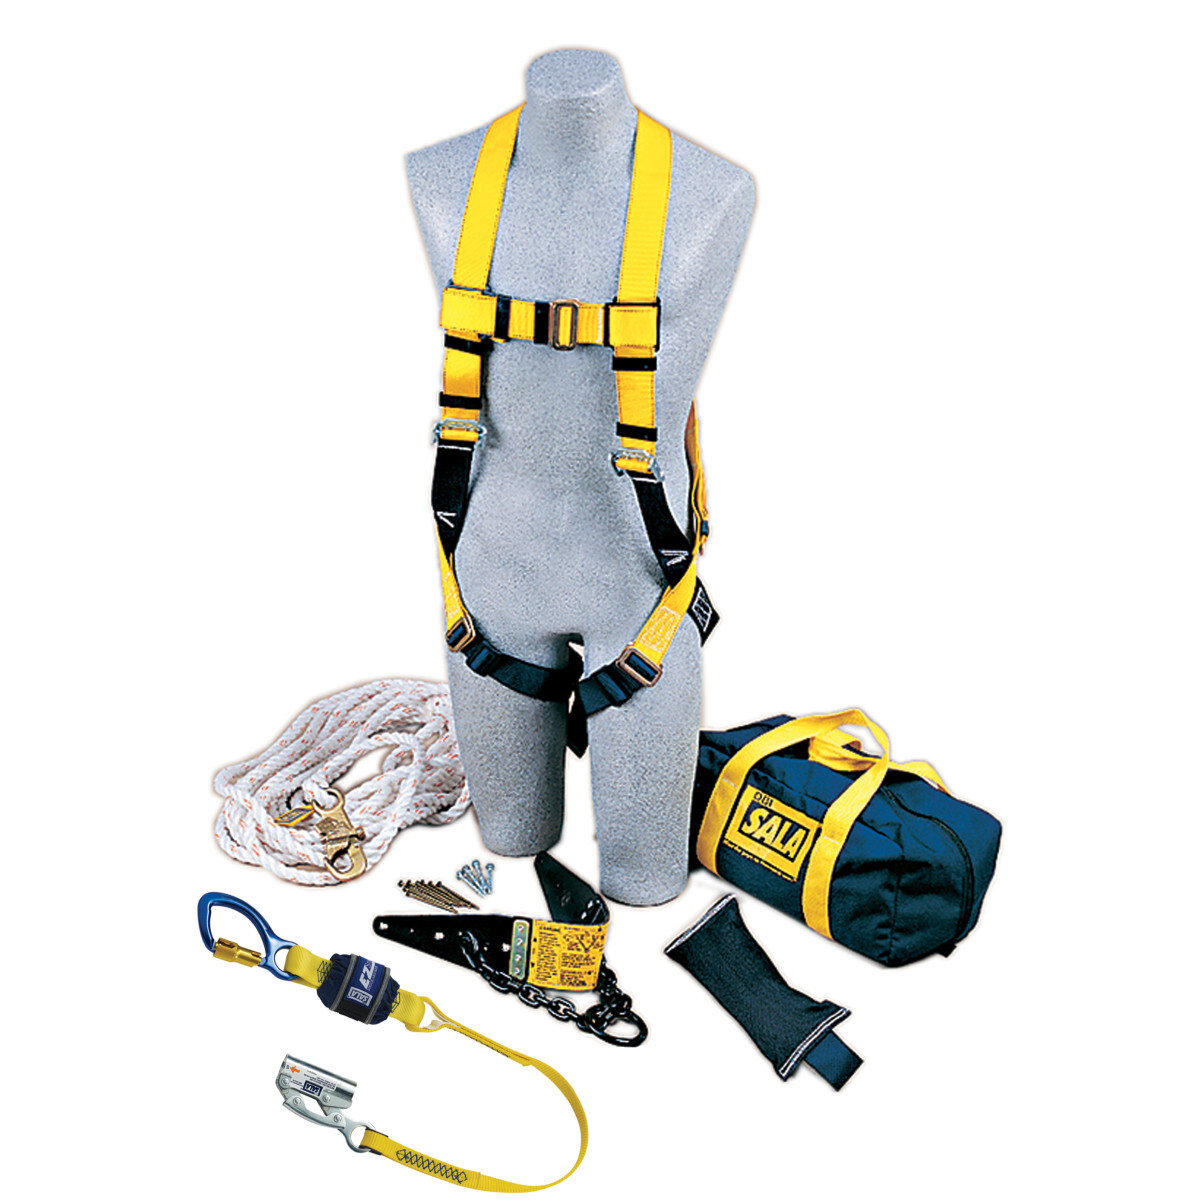 3M™ DBI-SALA® Roofer's Fall Protection Kit 2104168 (Includes Roof Anchor, Harness, Rope Adjuster With Lanyard, Lifeline, Counter